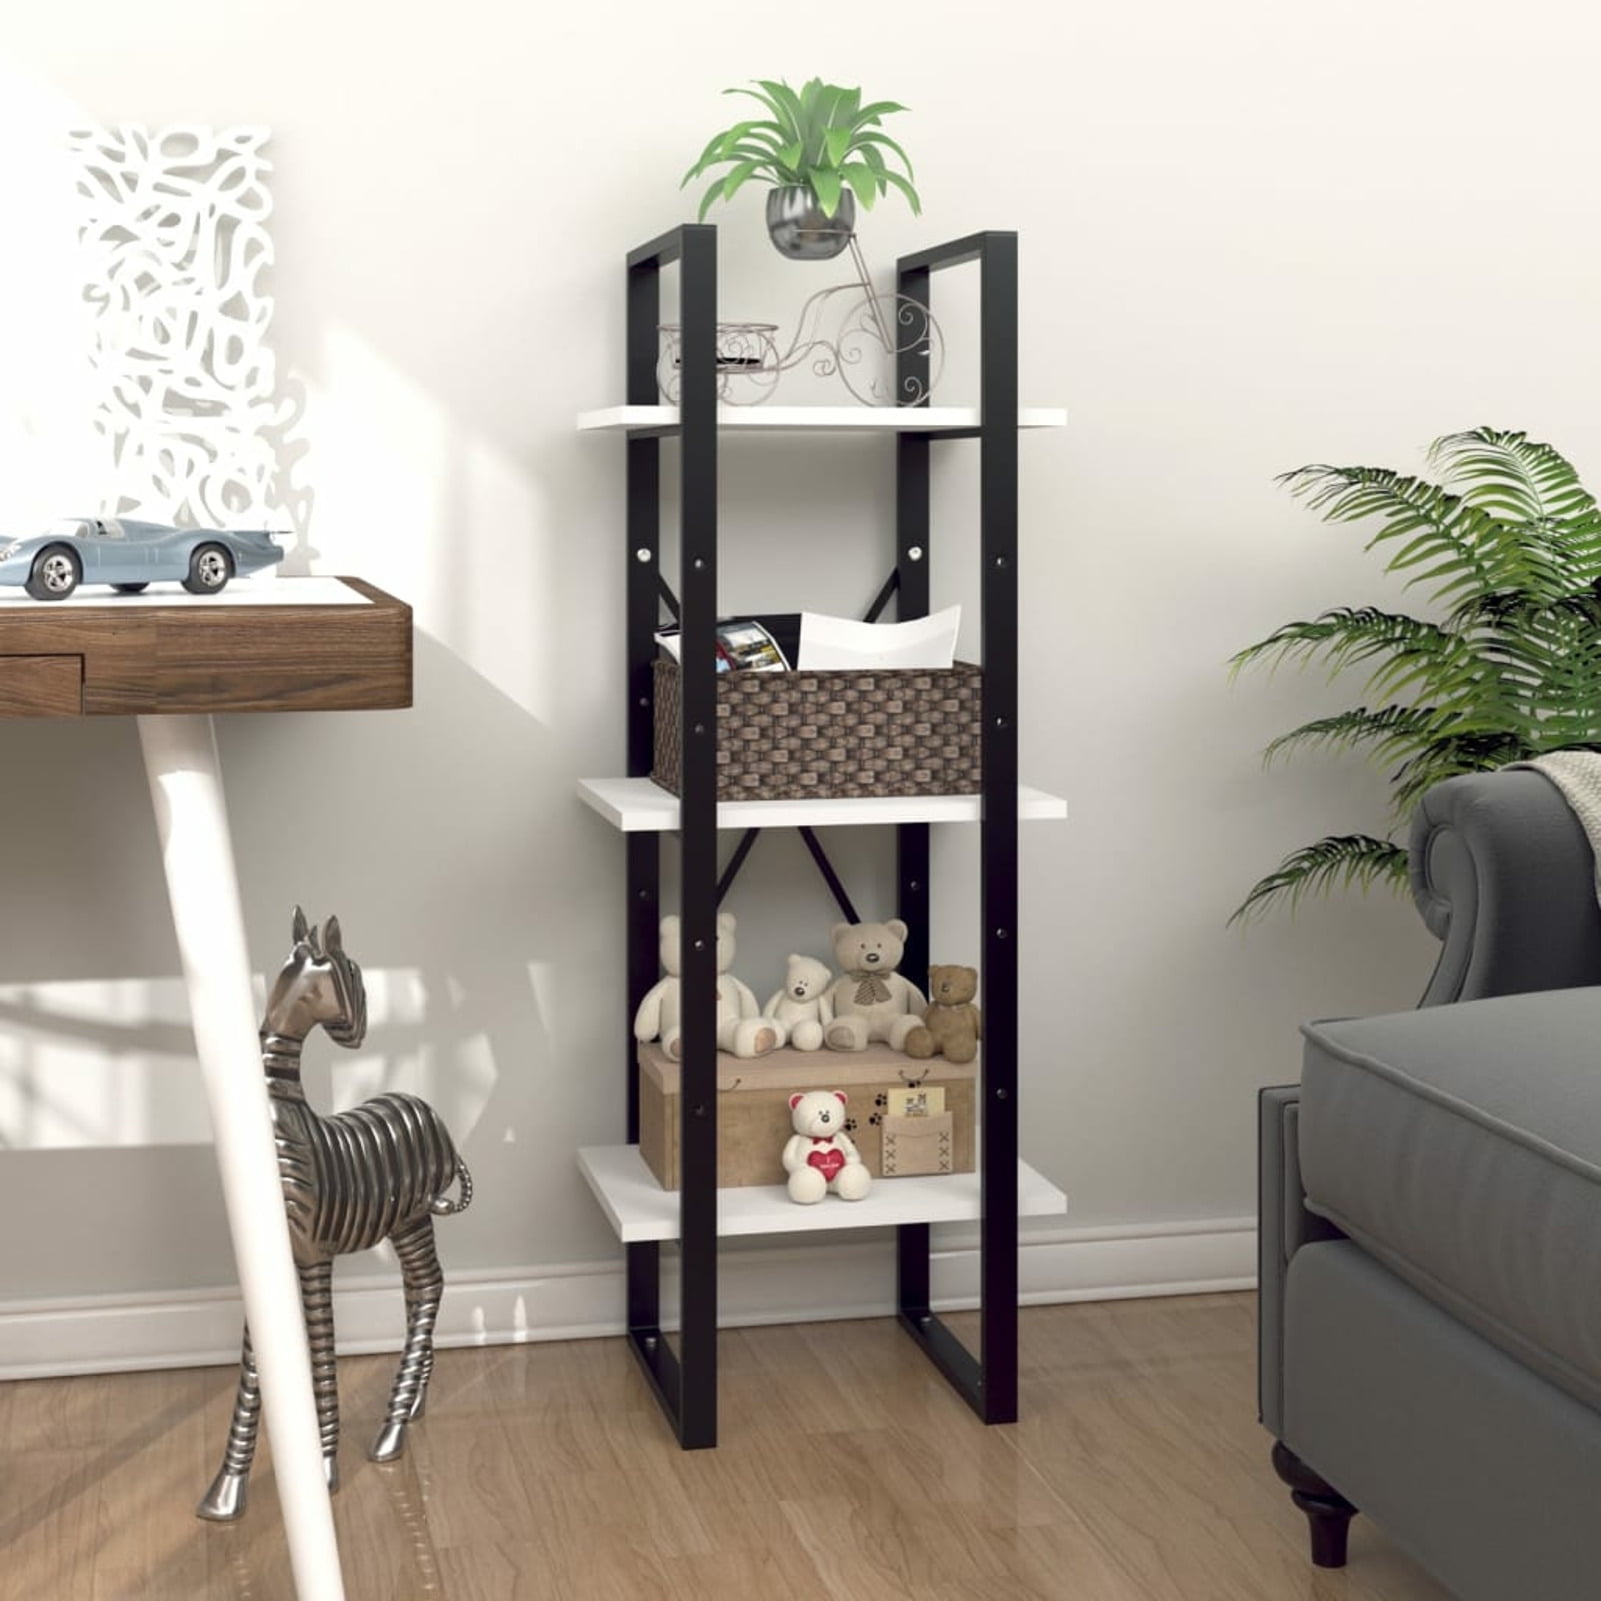 Details about   Etagere Wheeled 4 Shelf Retail Display with Glass Top & Adjustable Wood Shelves 